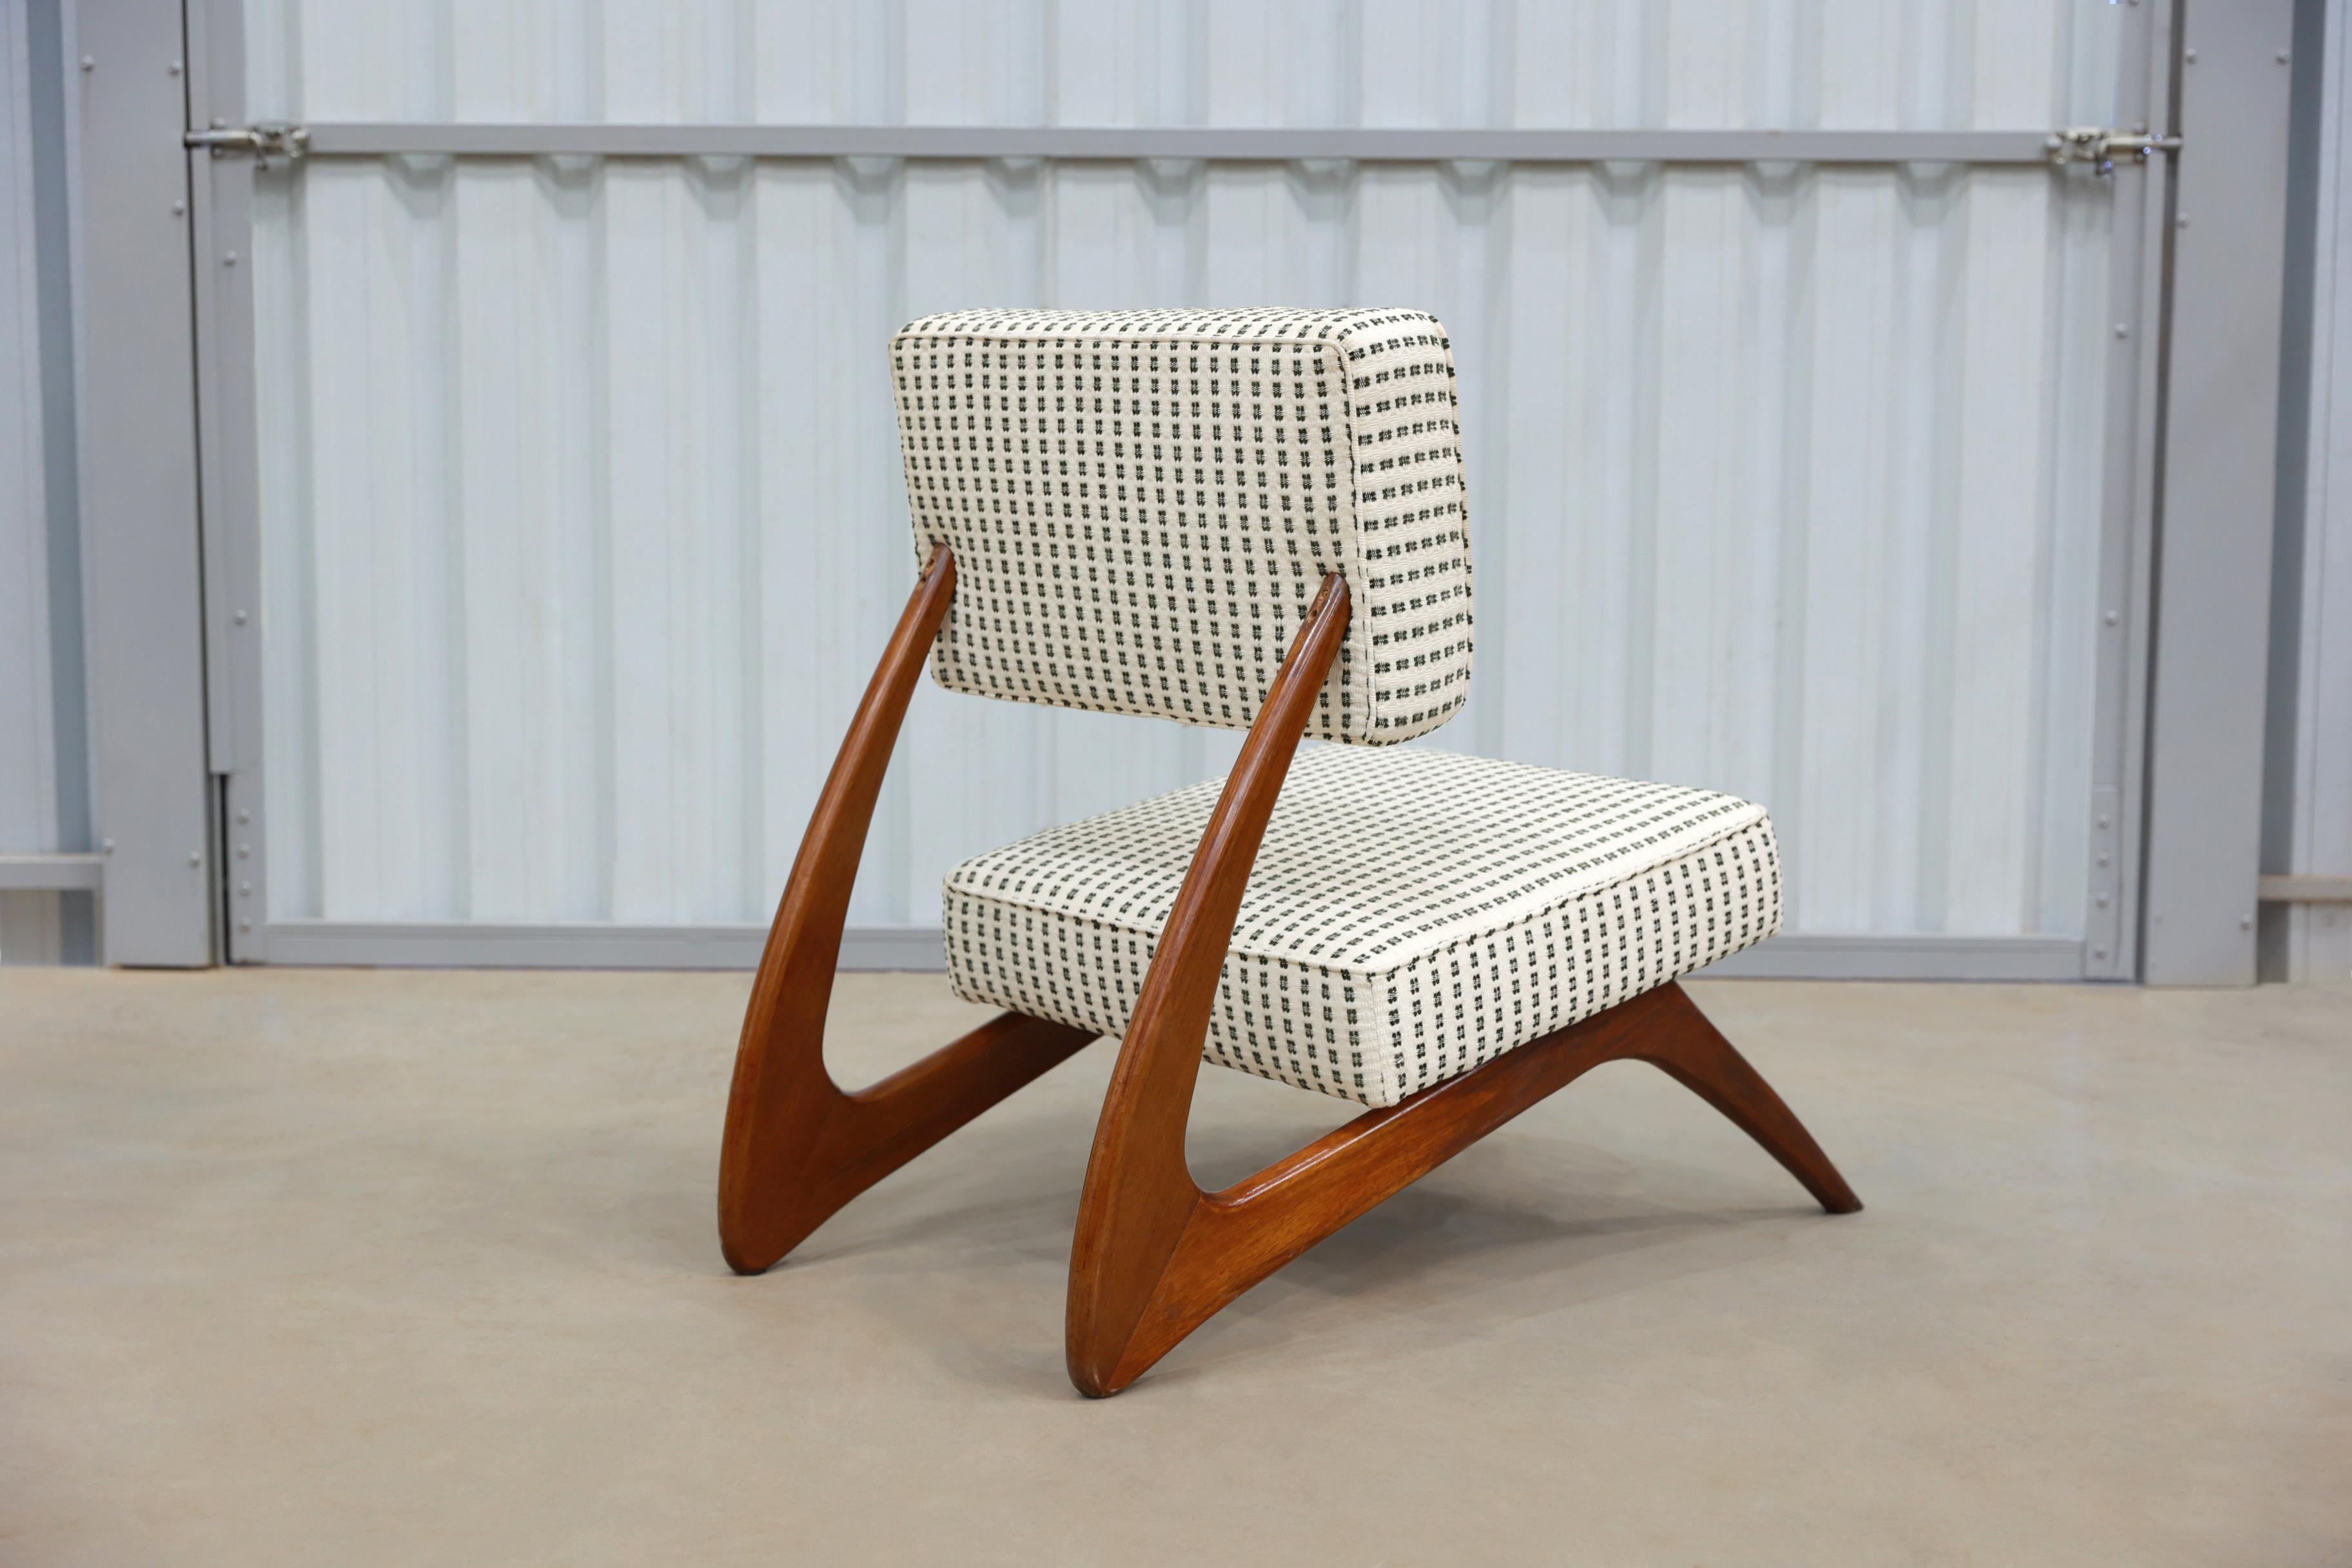 Woodwork Brazilian Modern Lounge Chair in hardwood by Moveis Cimo, Brazil, 1950s